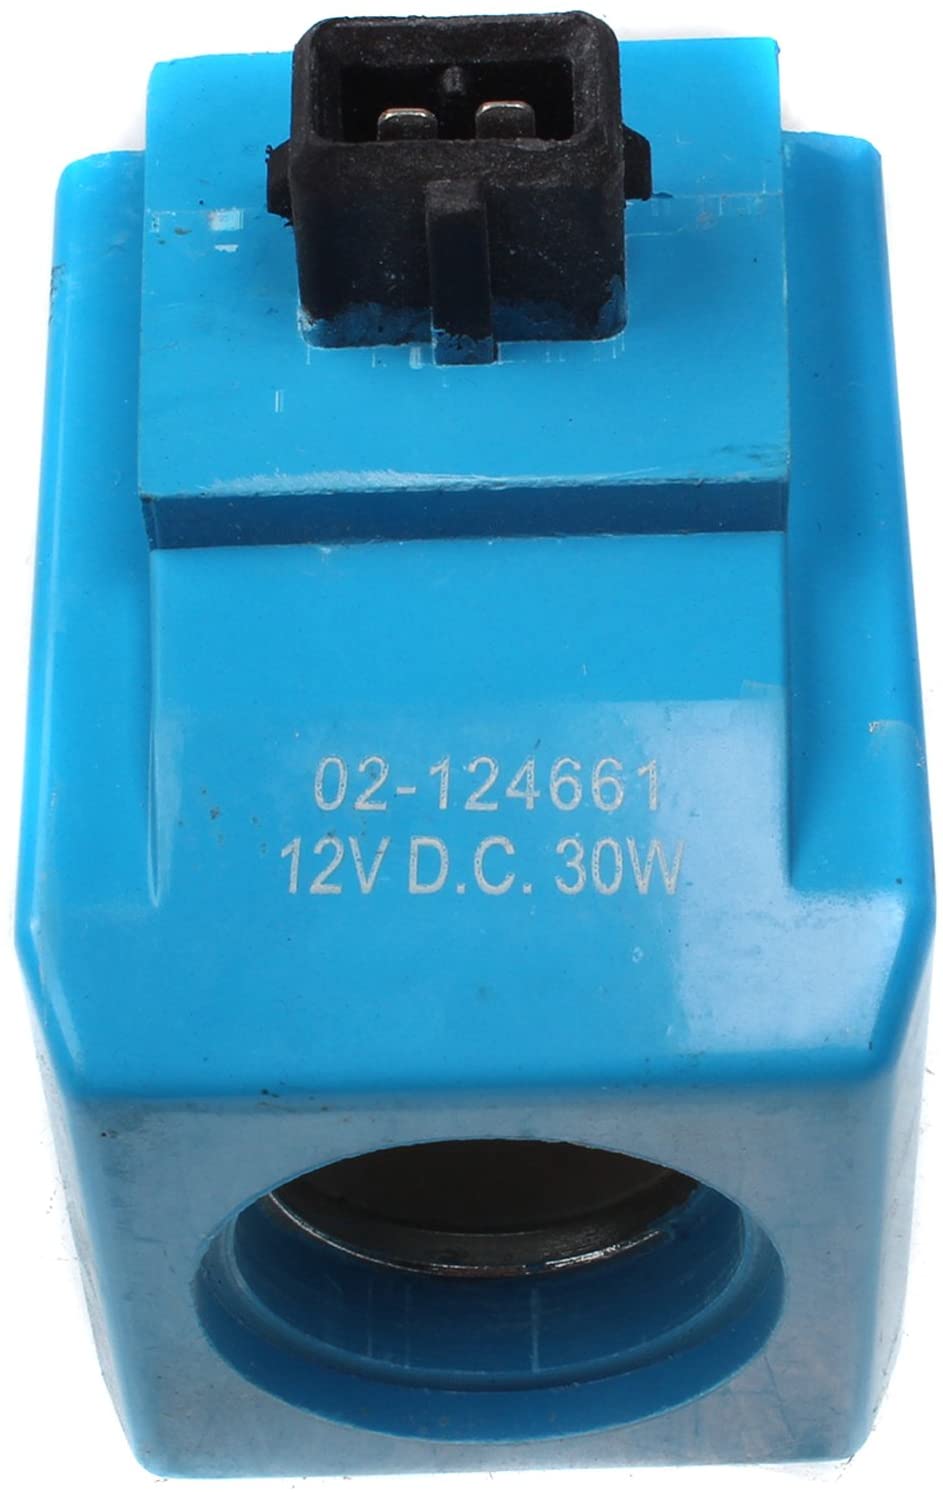 Solenoid Coil 02-124661 for Eaton vickers Solenoid 12V 30W - KUDUPARTS